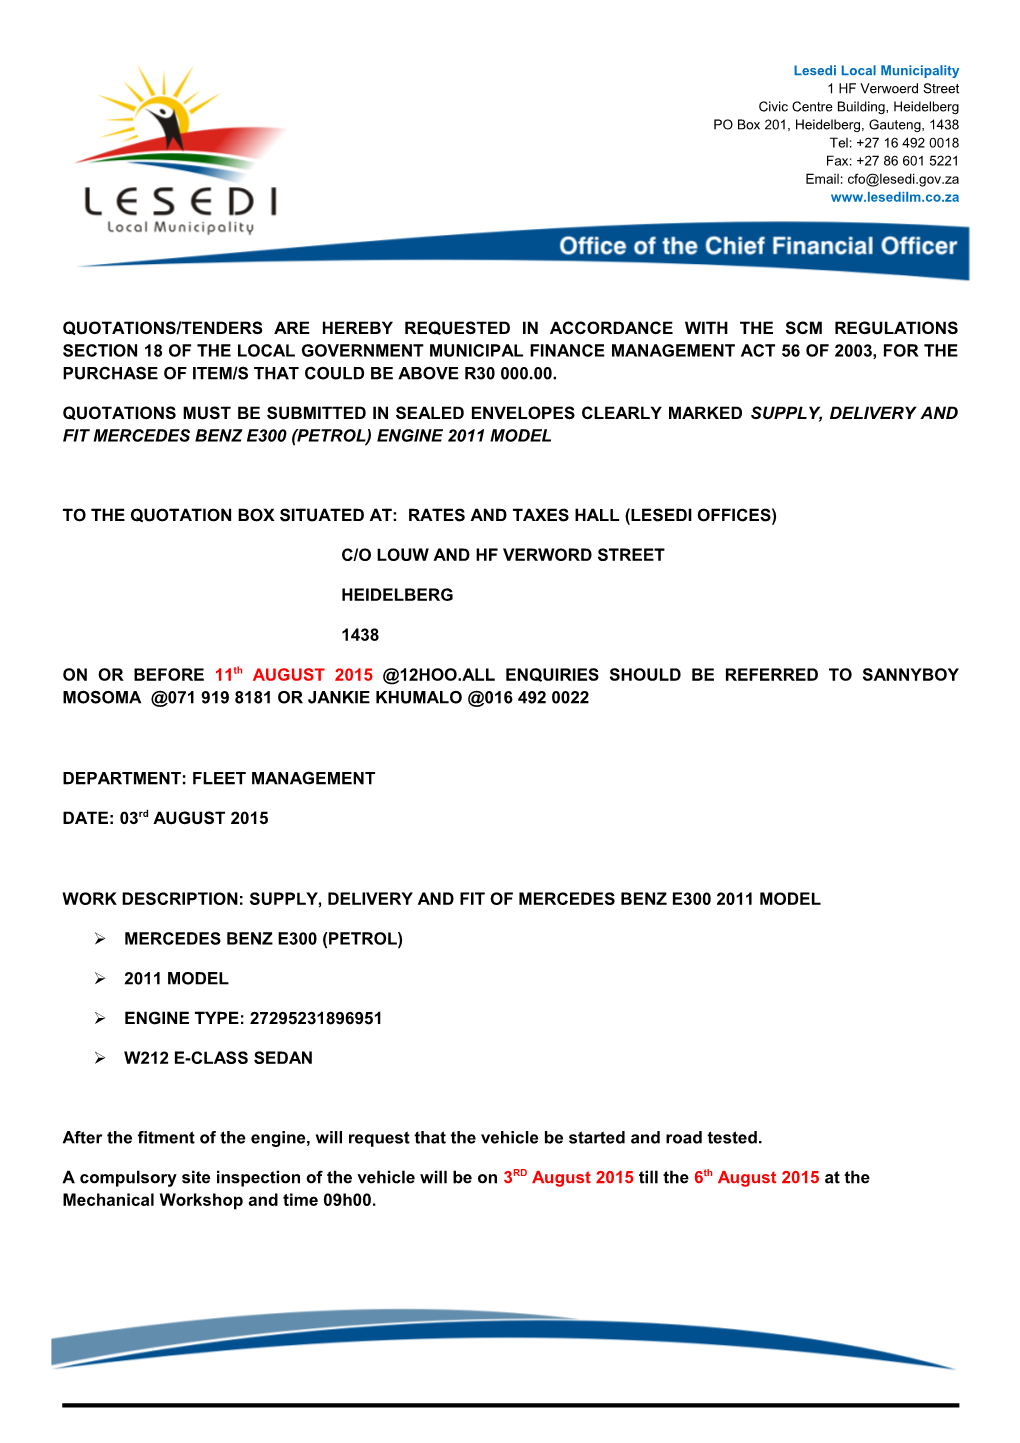 Quotations/Tenders Are Hereby Requested in Accordance with the Scm Regulations Section s1